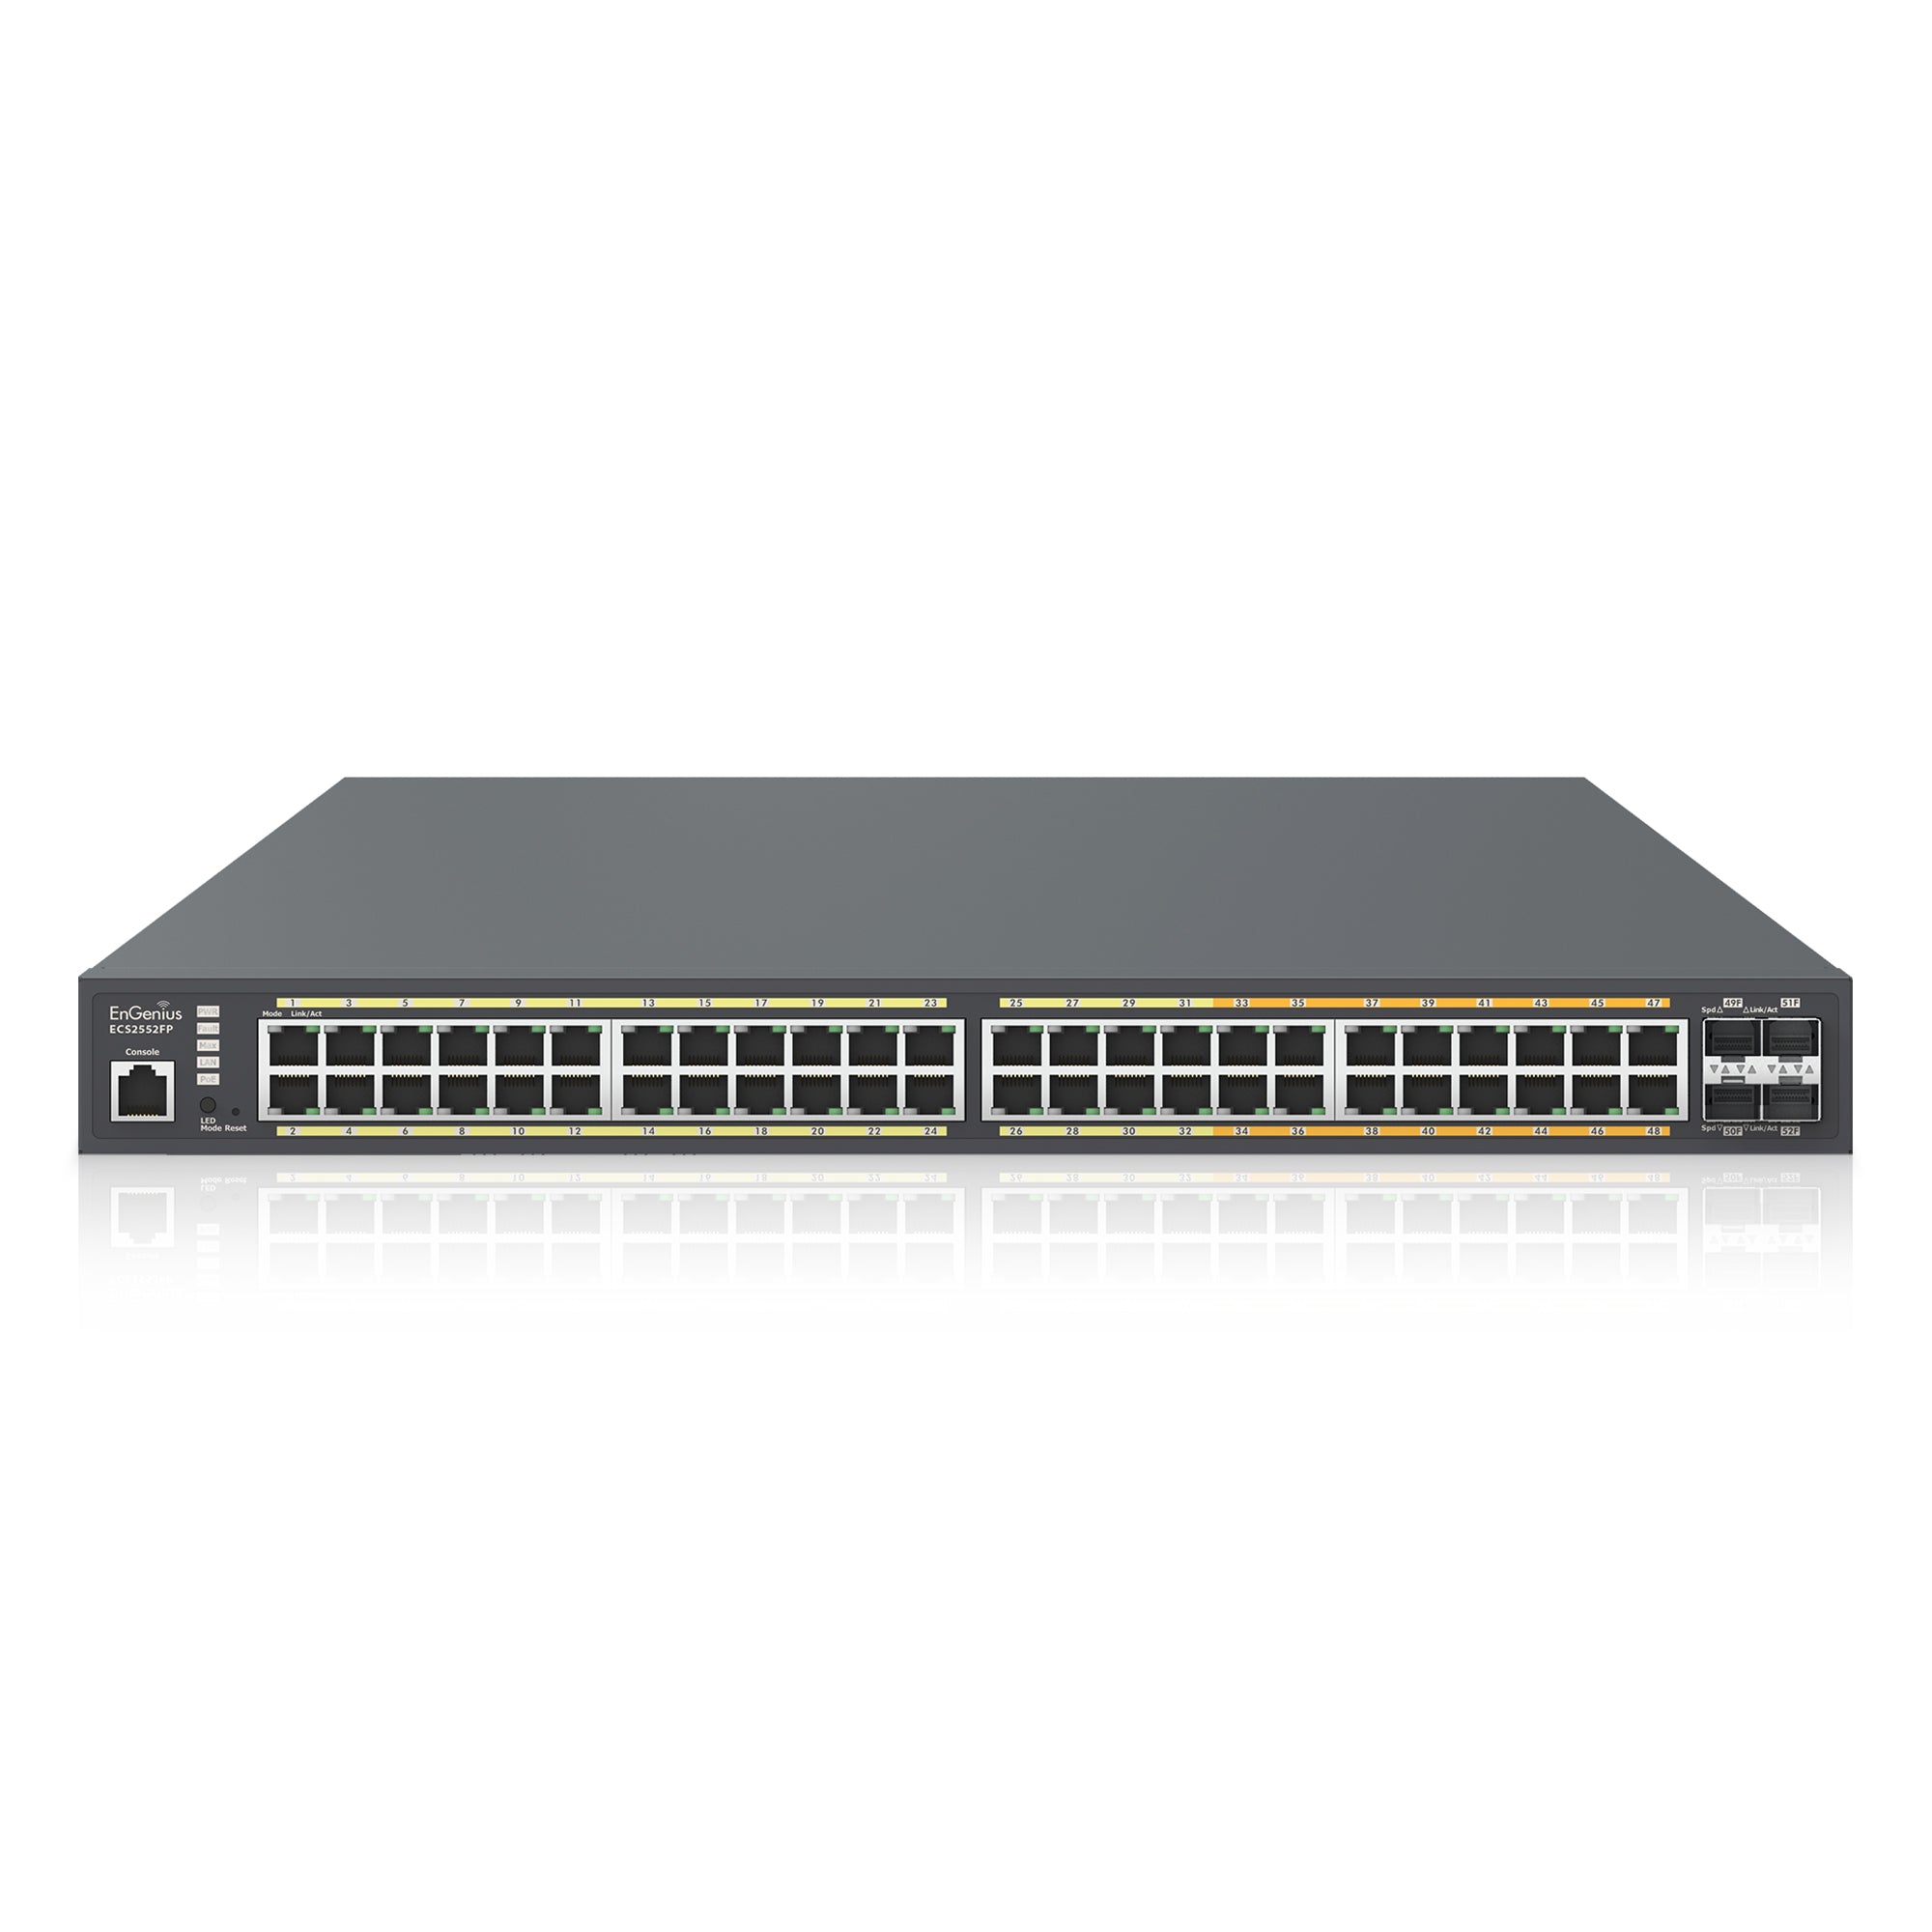 ECS2552FP: Cloud Managed 48-Port Multi-Gig PoE+ Network Switch with 4 SFP+ Ports